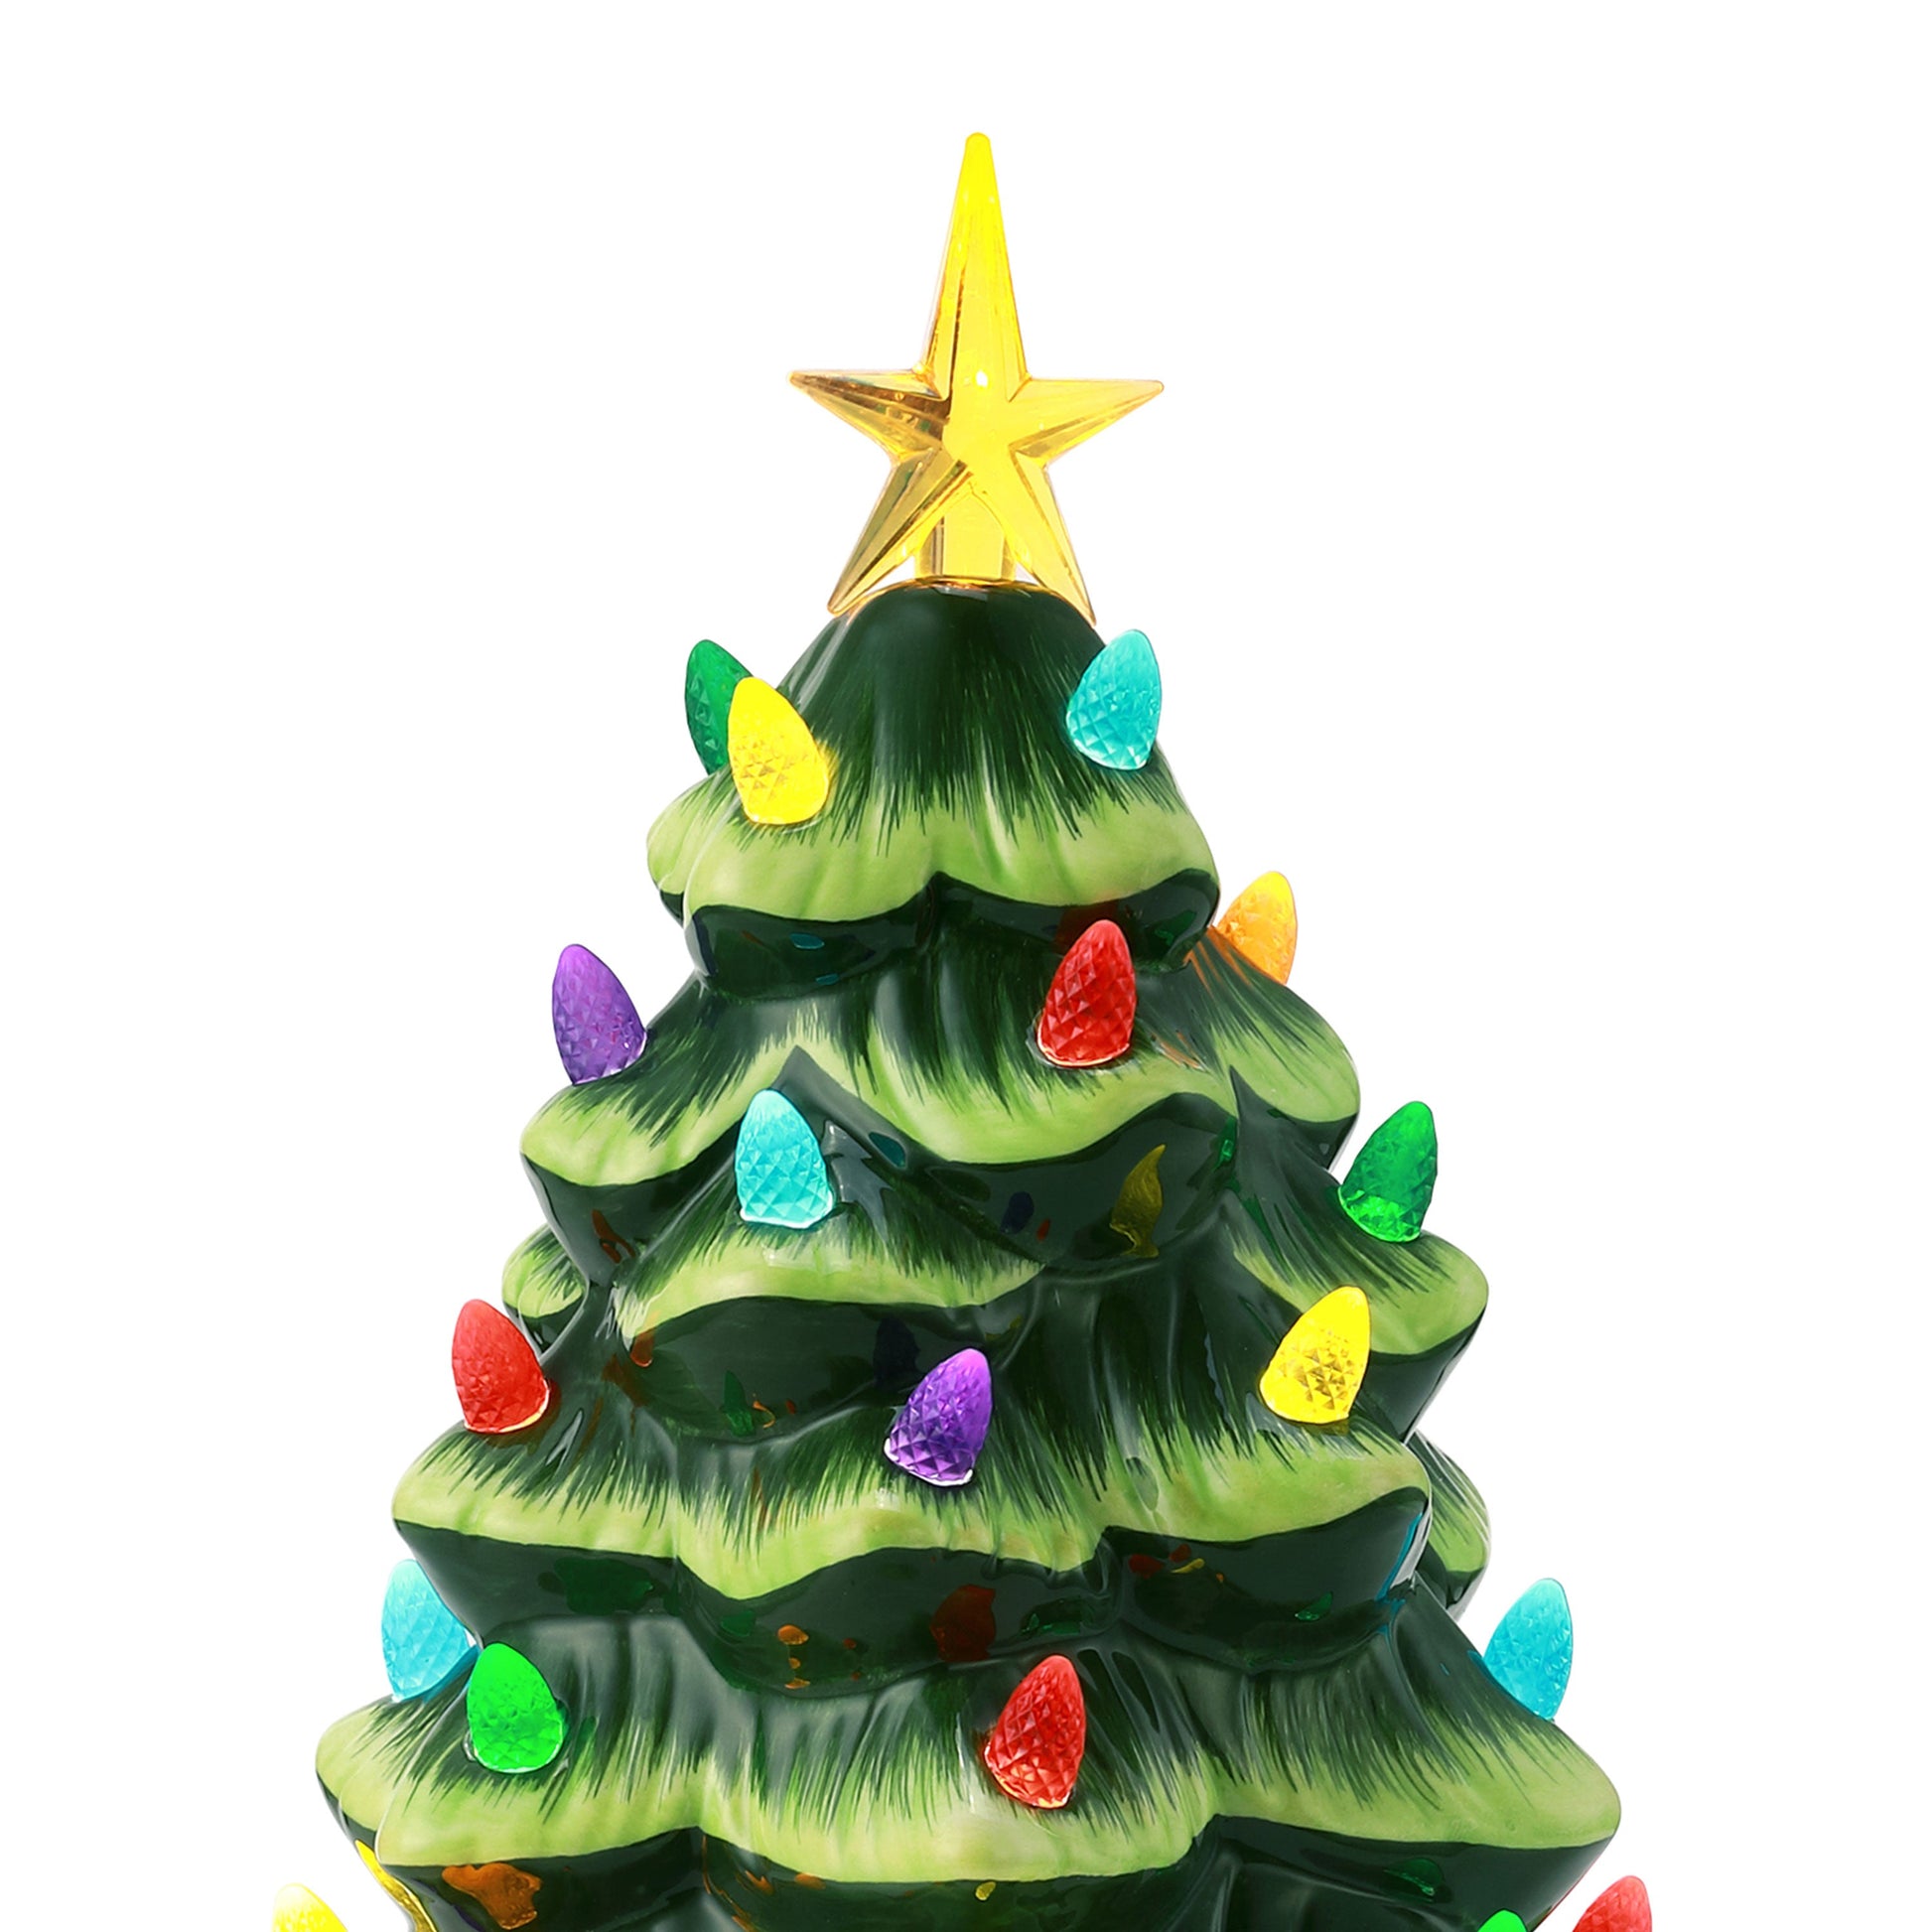 20 Indoor/Outdoor Battery-Operated Lighted Ceramic Christmas Tree - Green